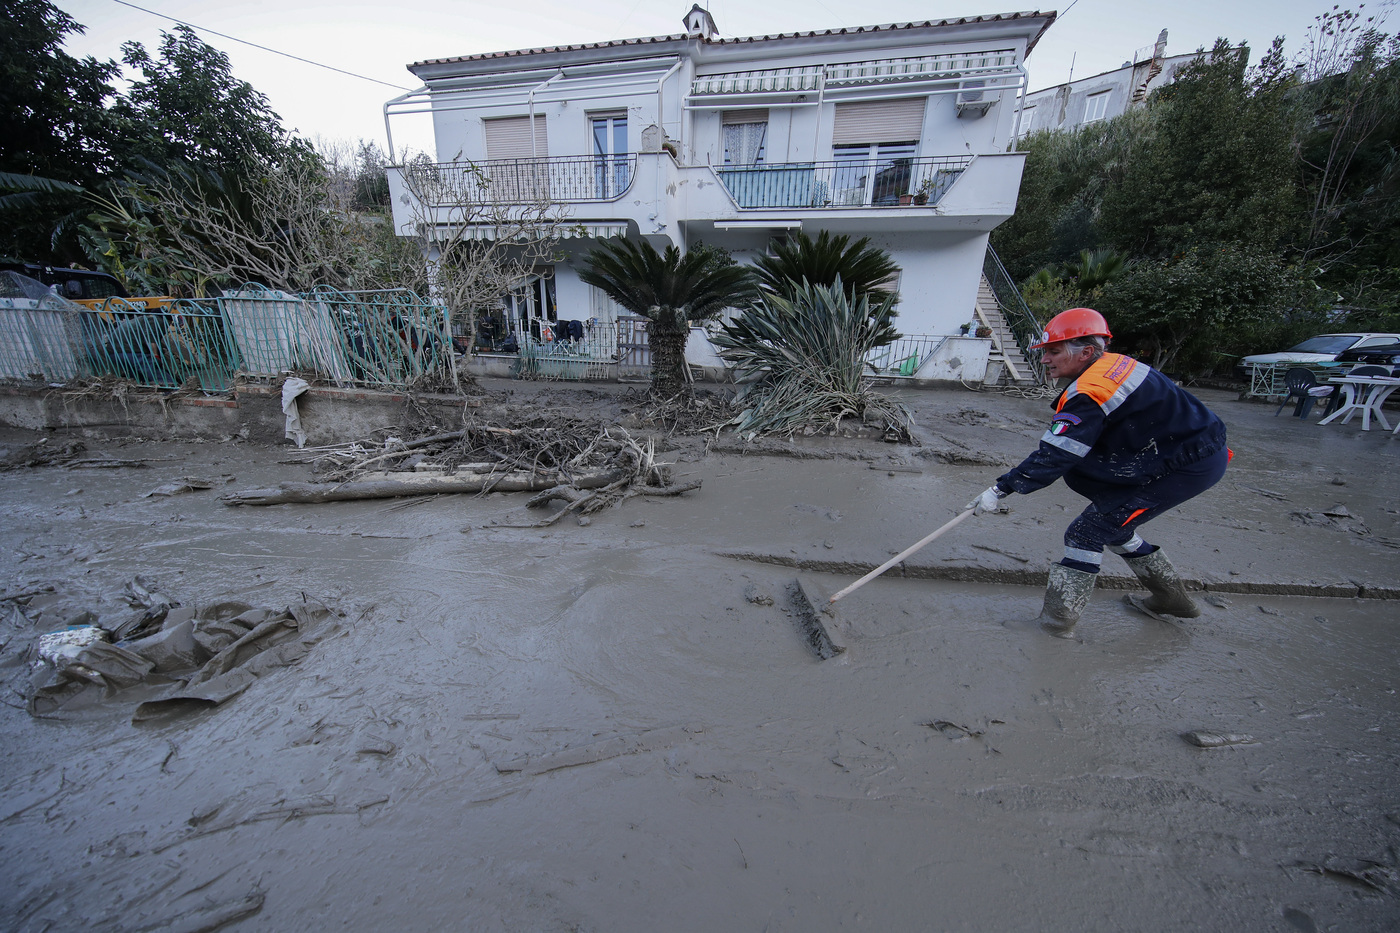 A man cleans mud and debris from a street after heavy rainfall triggered landslides that collapsed buildings and left as many as 12 people missing, in Casamicciola, on the southern Italian island of Ischia, Sunday, Nov. 27, 2022. Authorities said that the landslide that early Saturday destroyed buildings and swept parked cars into the sea left one person dead and 12 missing. (AP Photo/Salvatore Laporta)